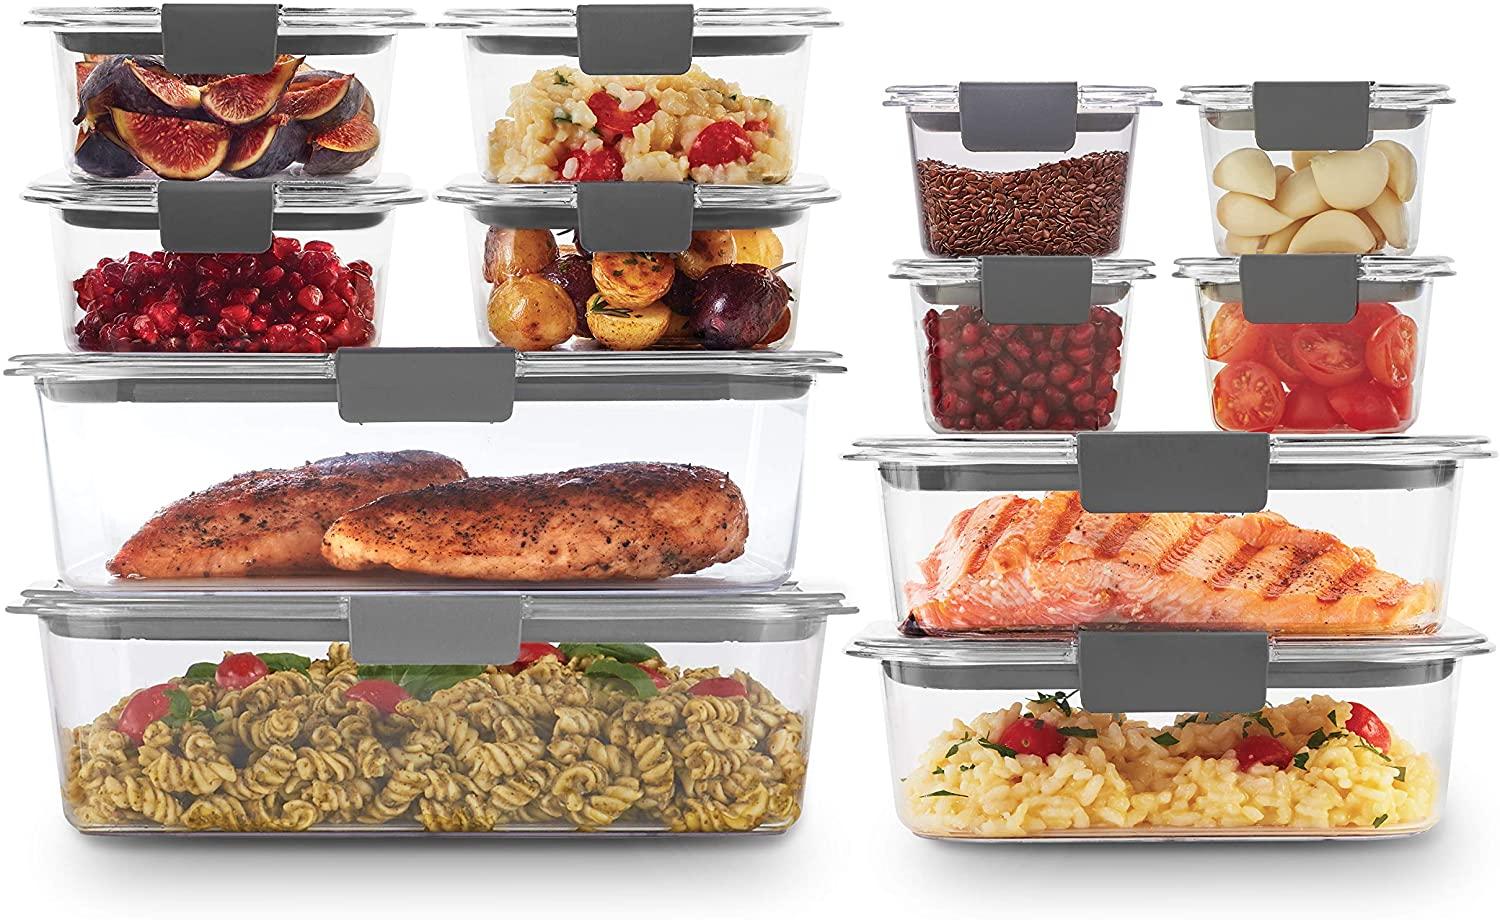 Rubbermaid Brilliance Storage 24-Piece Plastic Lids for $27.99 Shipped